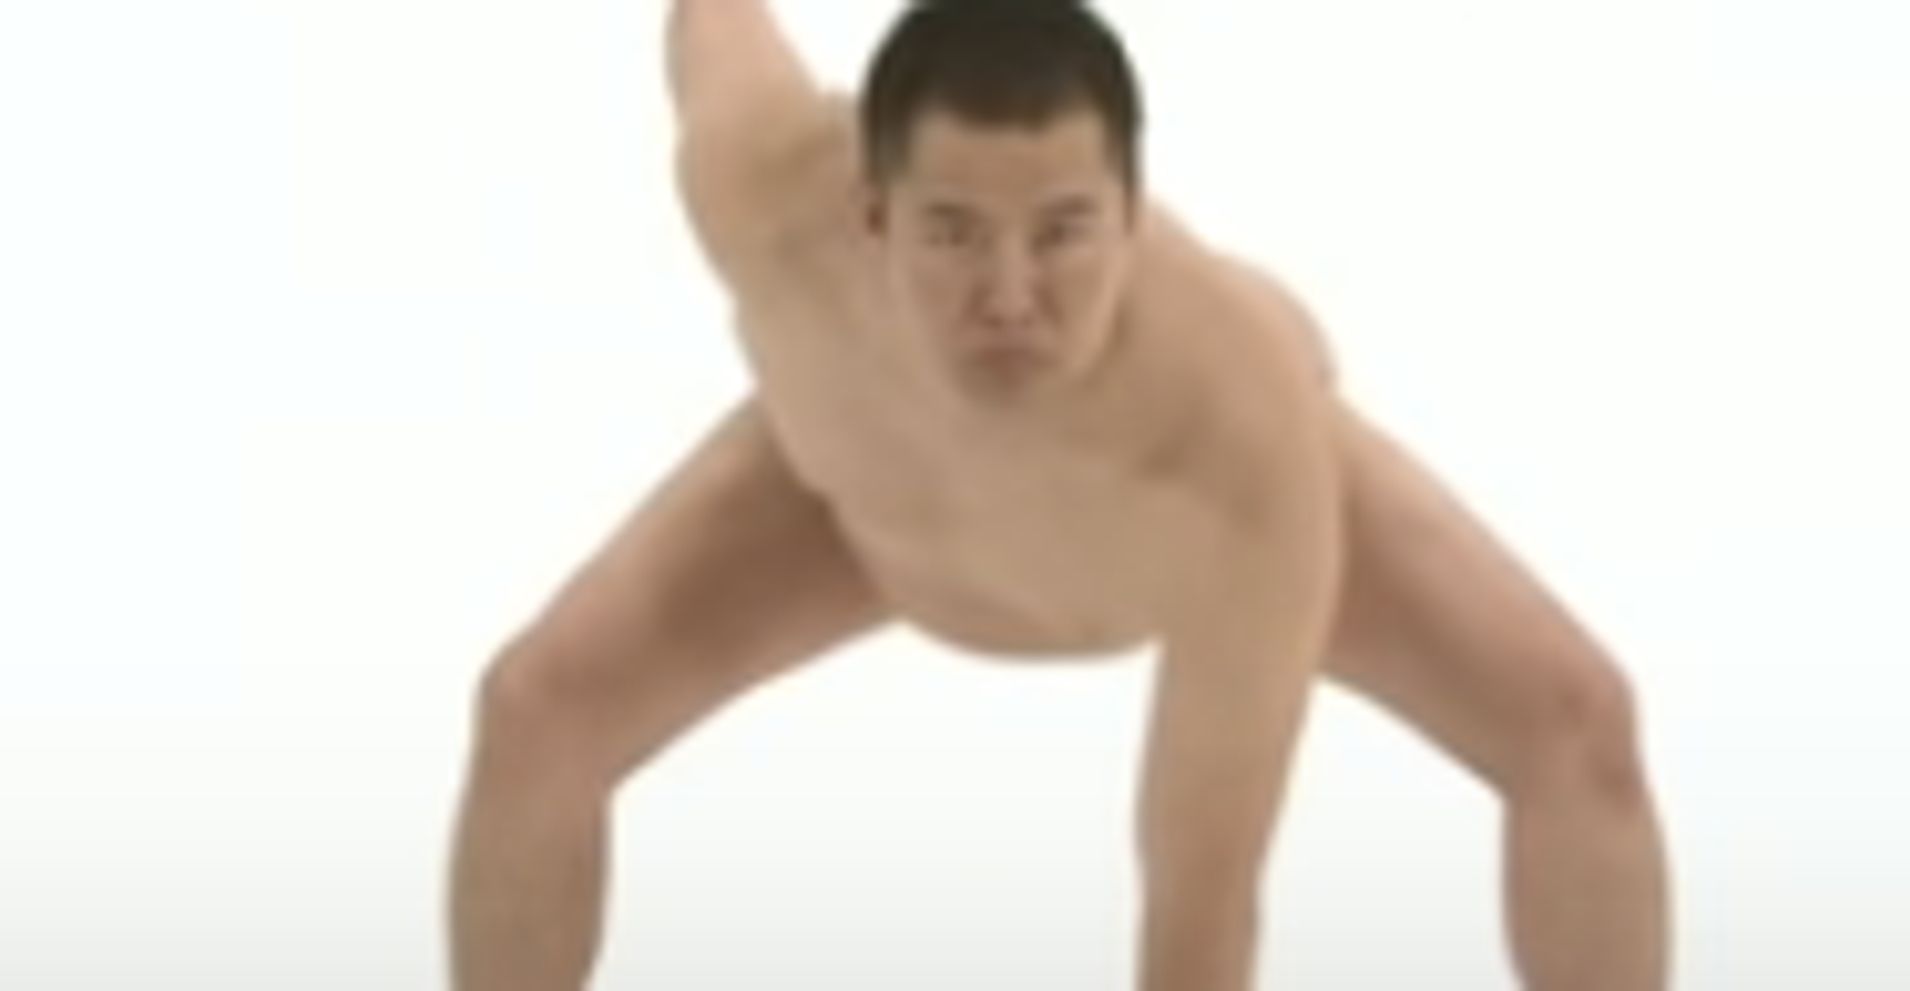 Watch A Japanese Man Do 'American Butt Naked Poses'